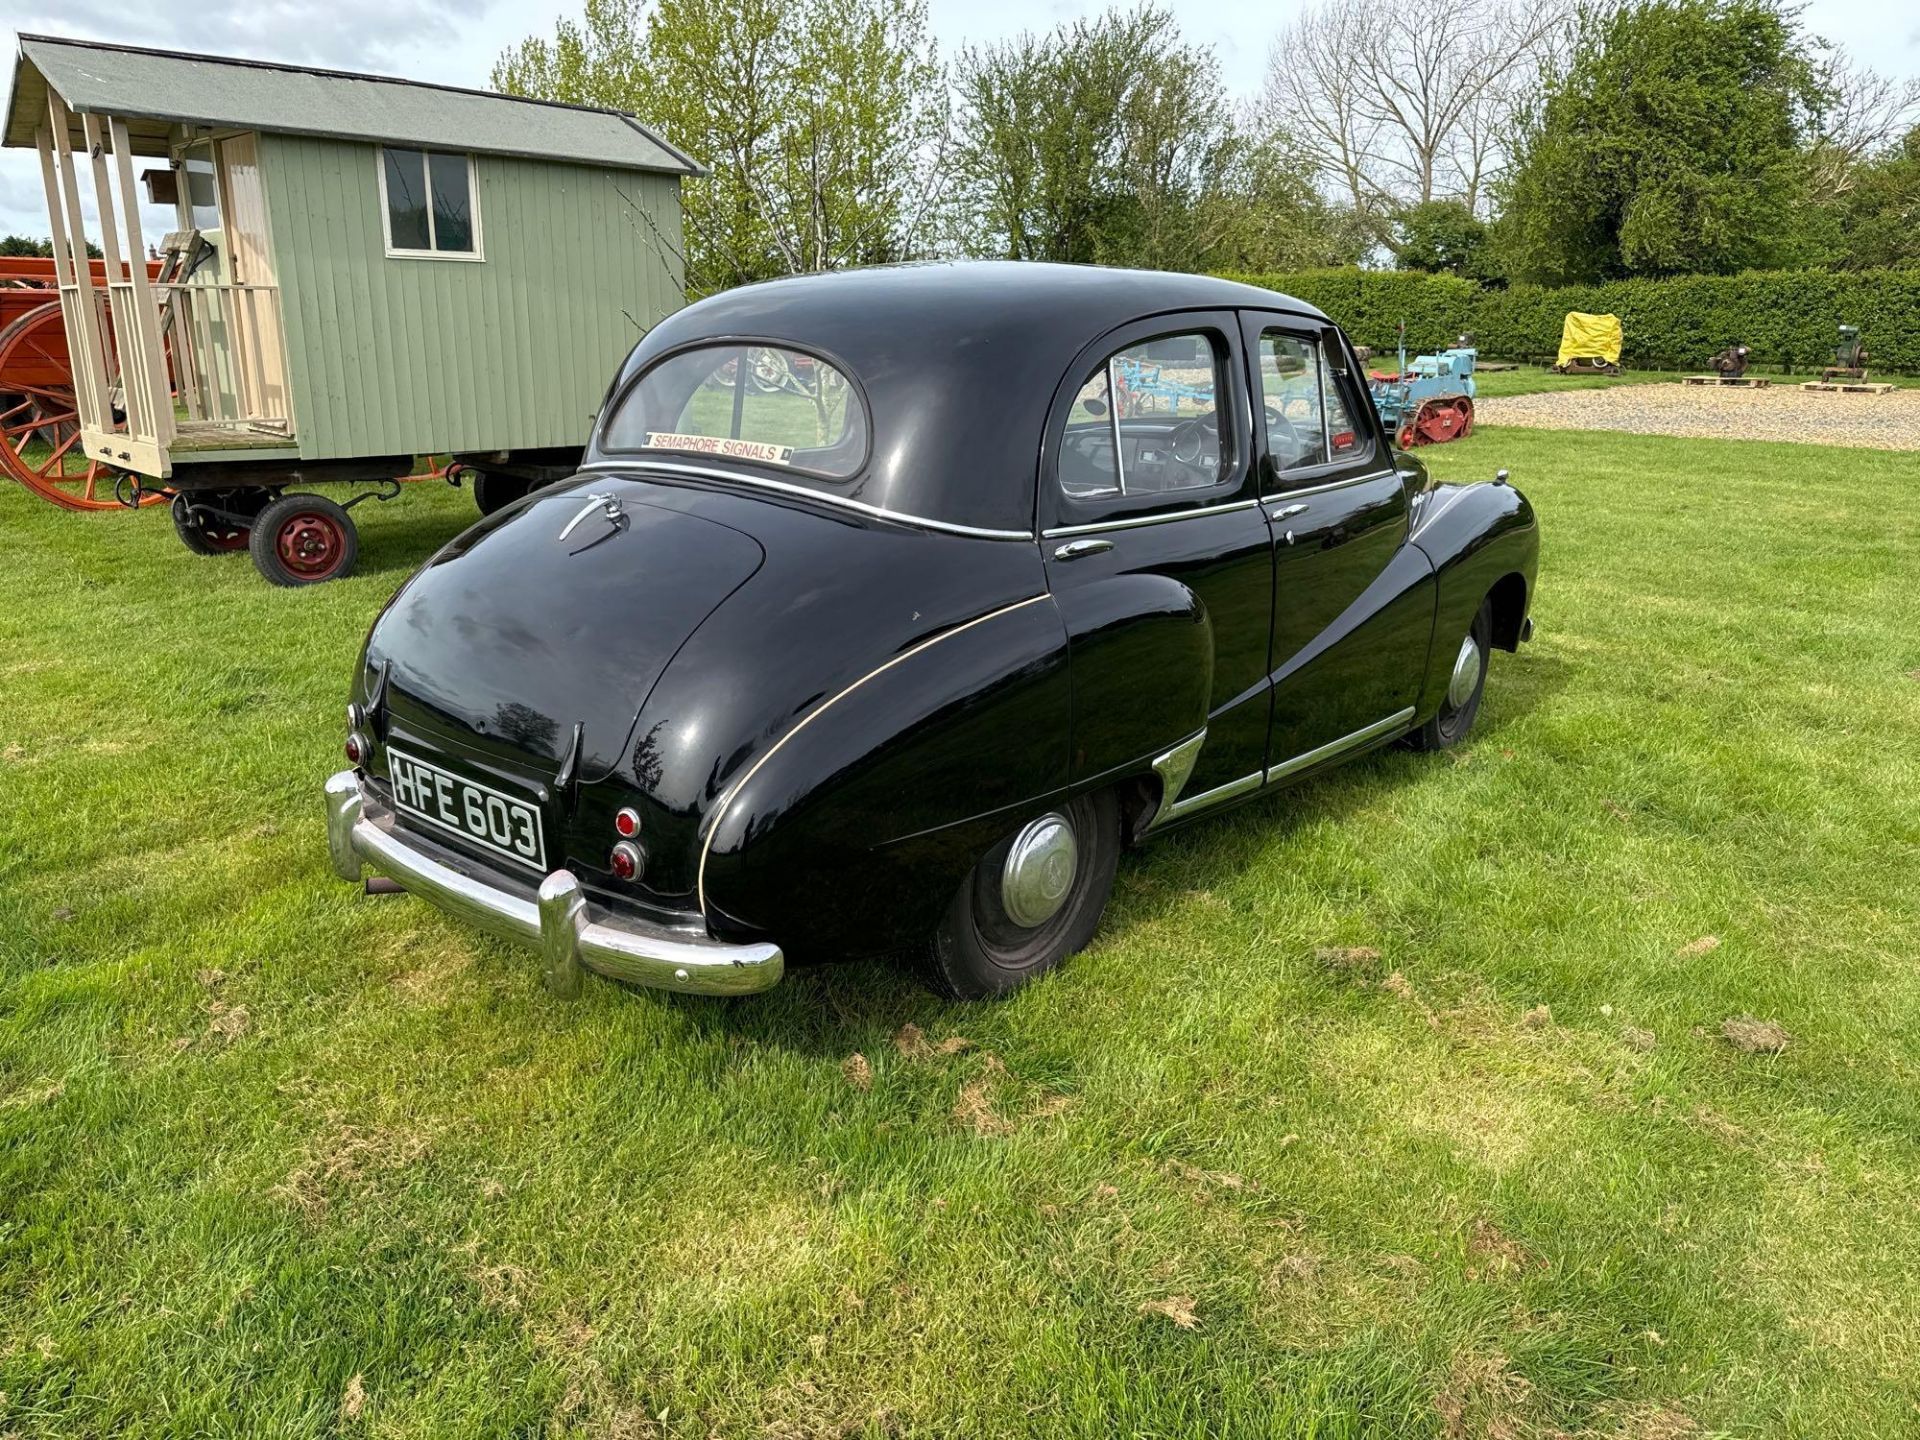 1954 Austin A40 Somerset black saloon car with 1200cc petrol engine, red leather interior and spare - Image 24 of 24